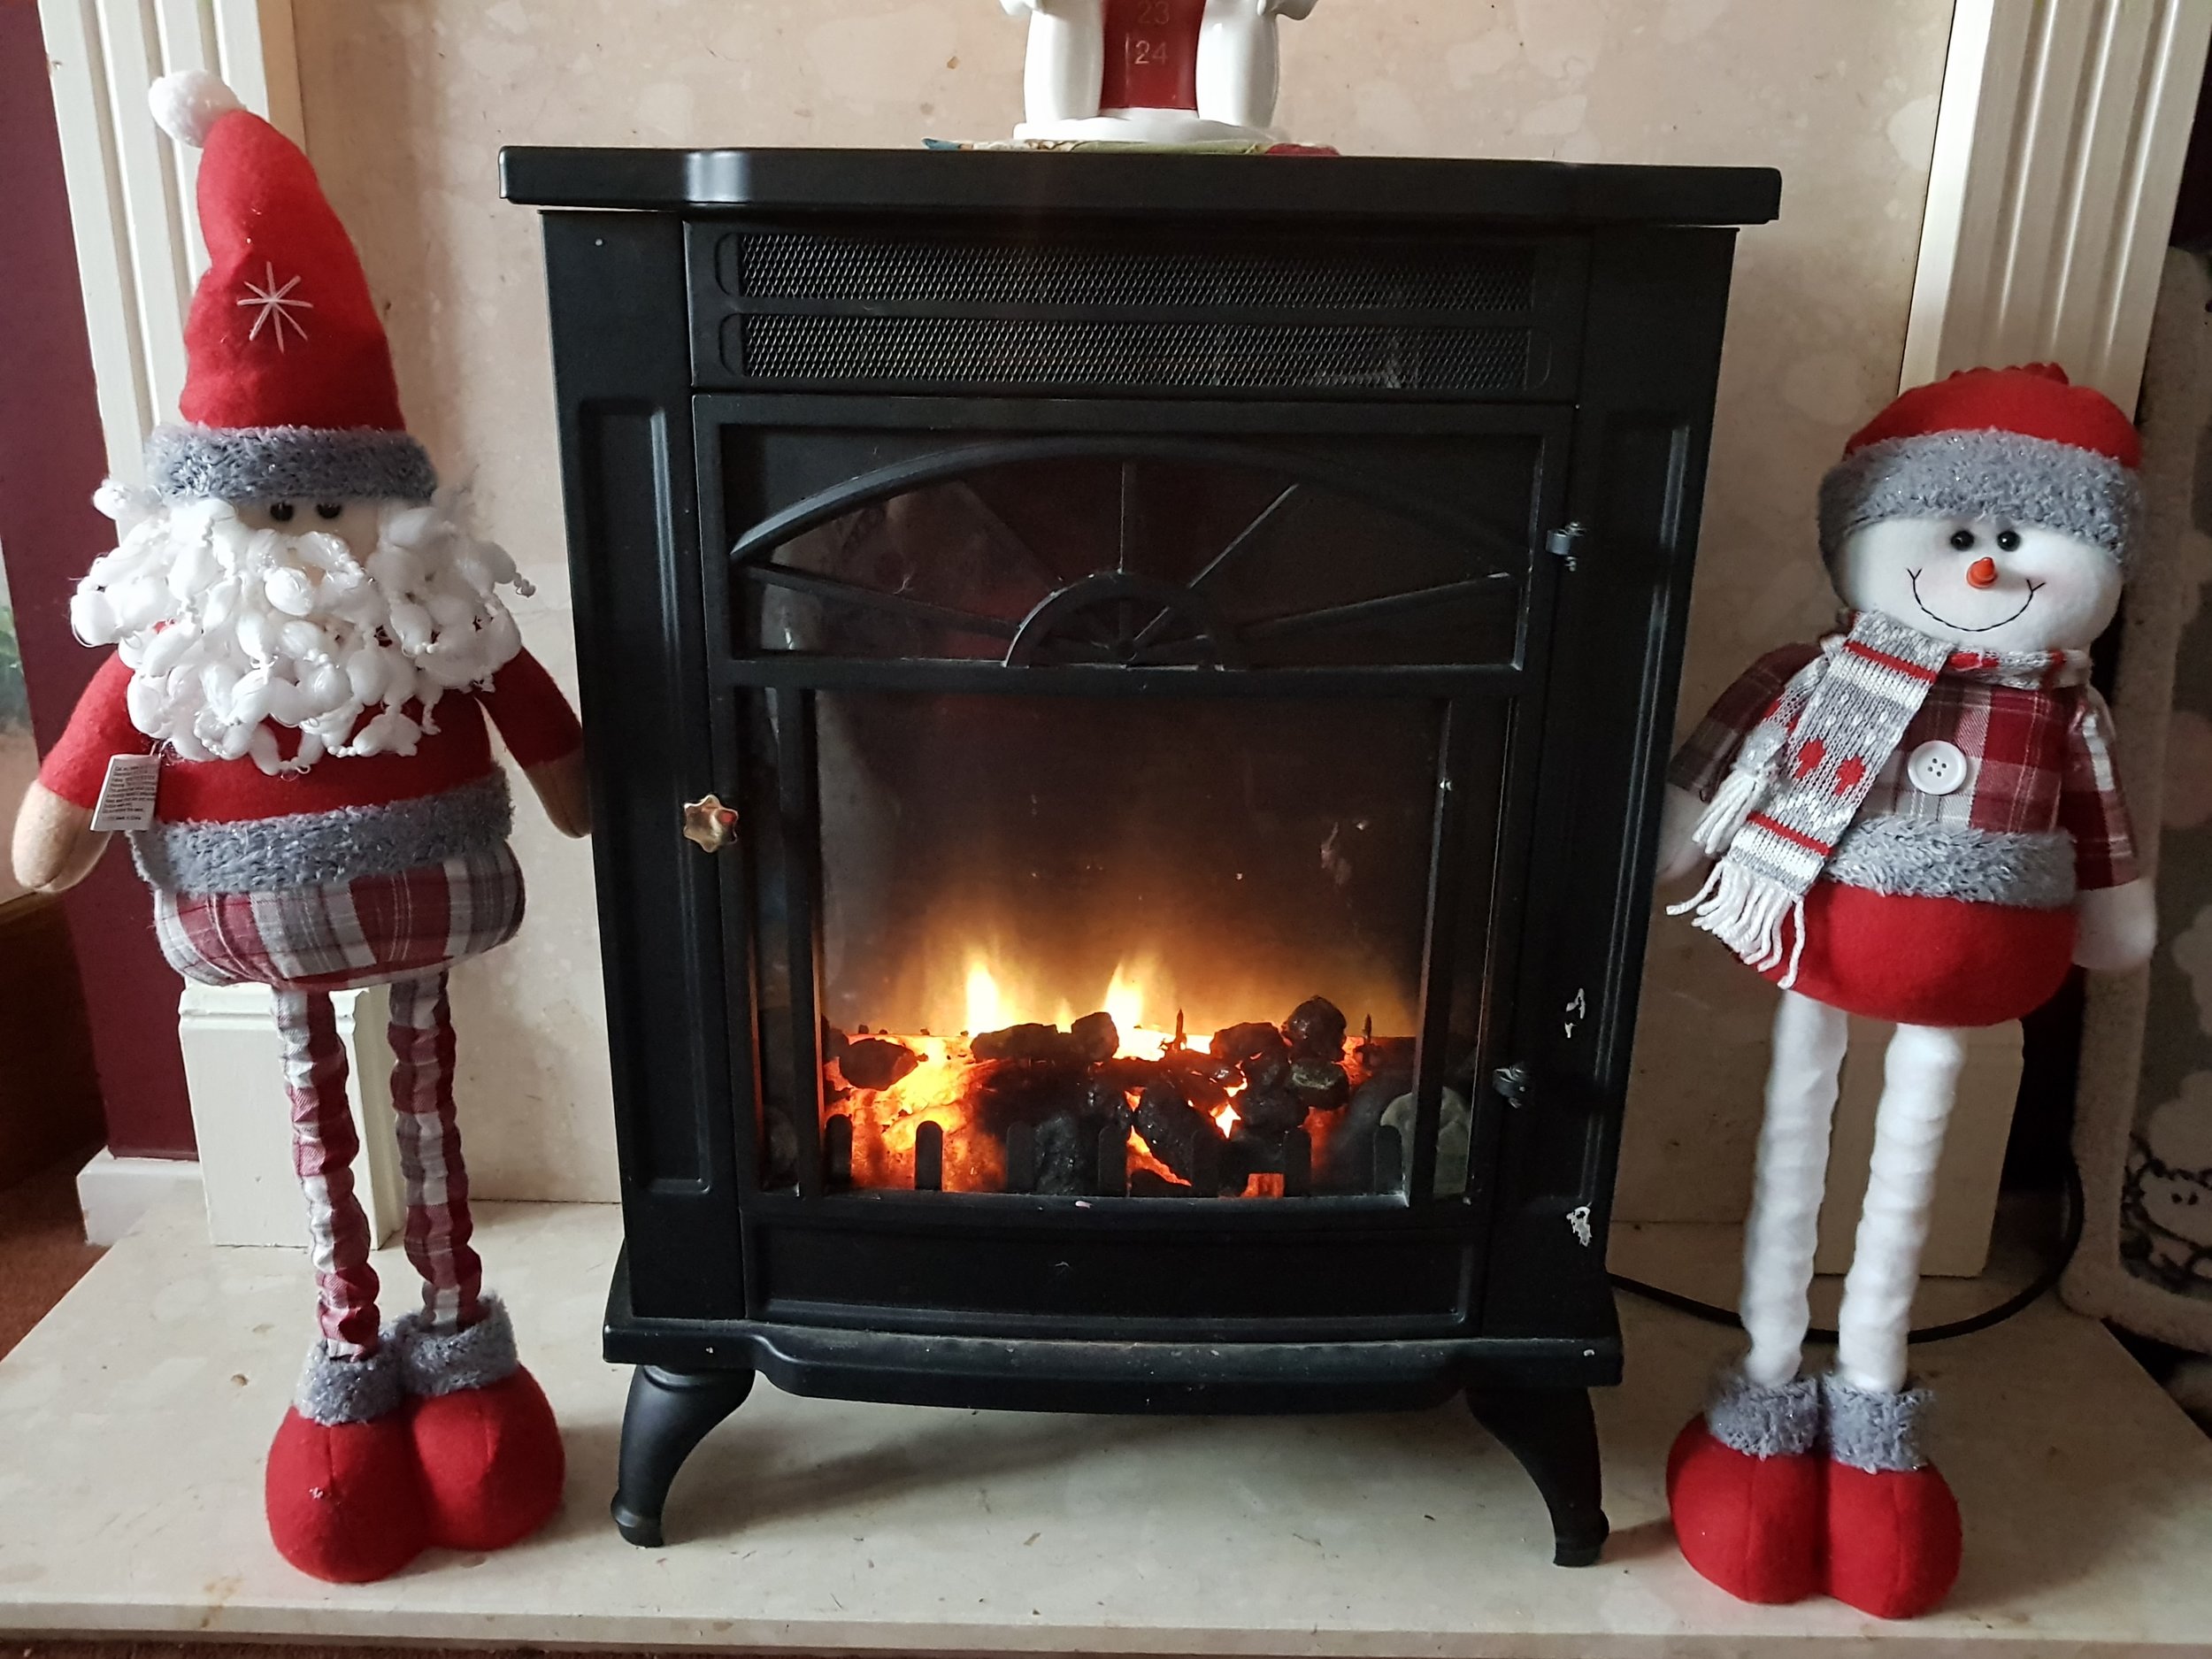 Extendable leg characters and fireplace